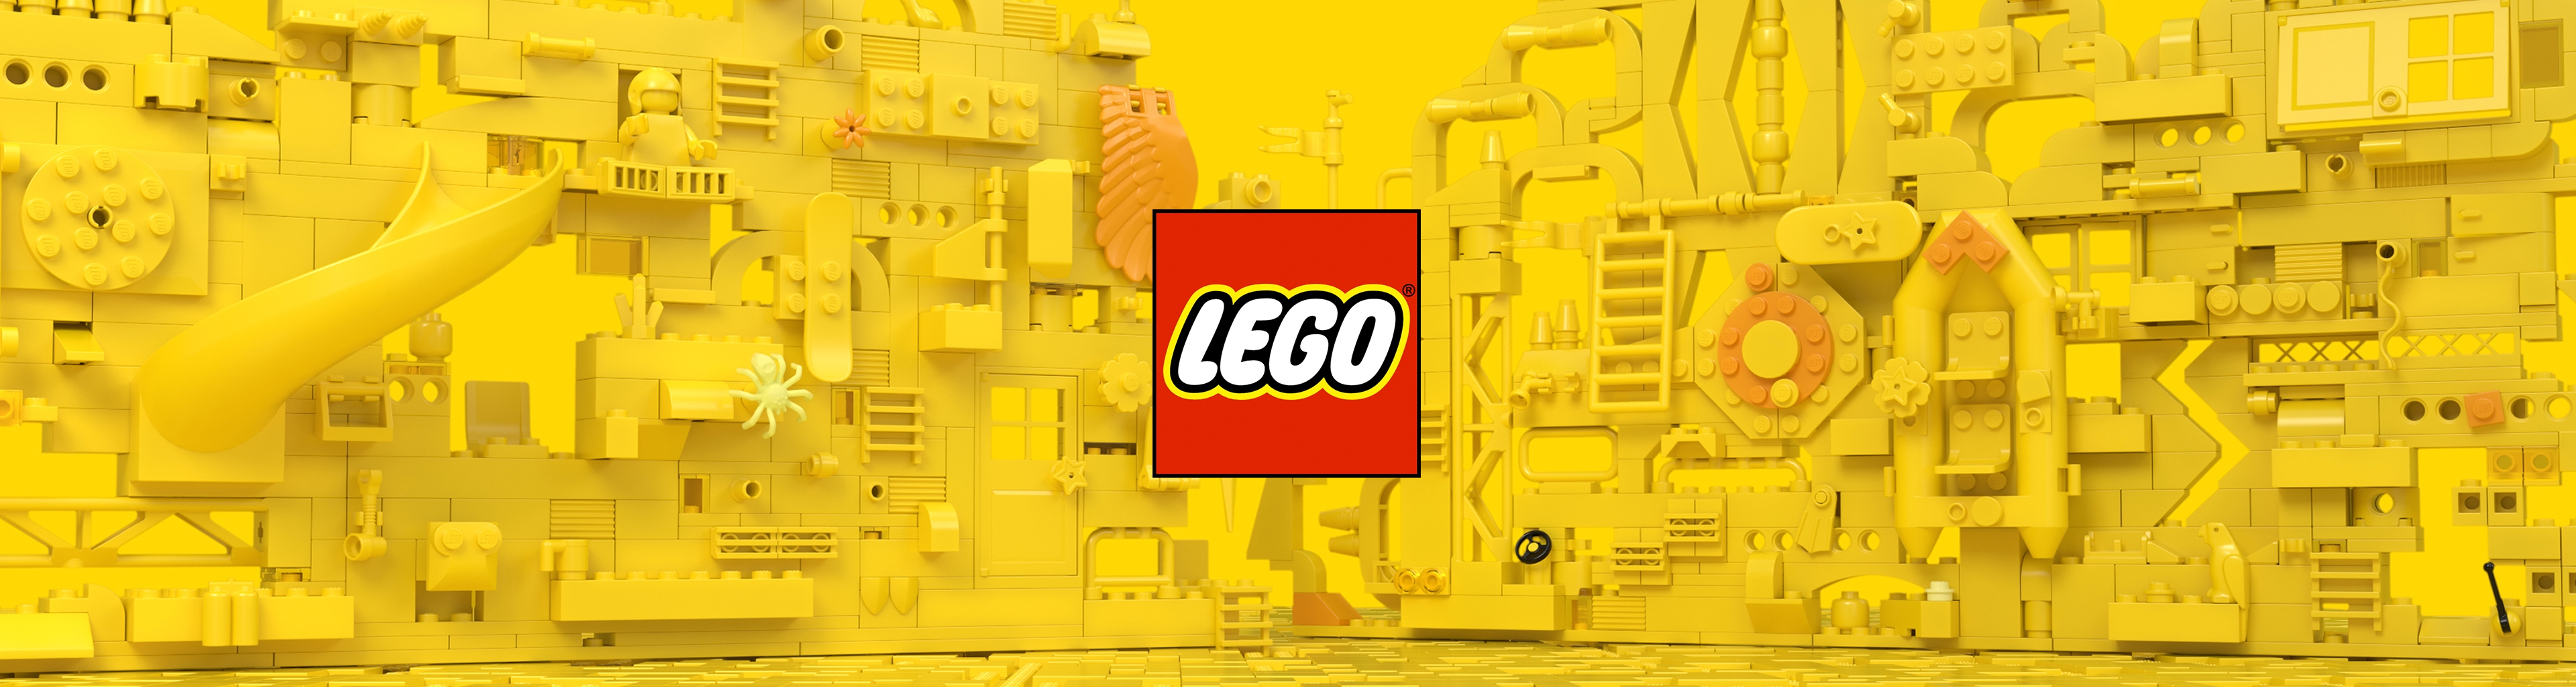 The LEGO Brand - The LEGO Group - About 